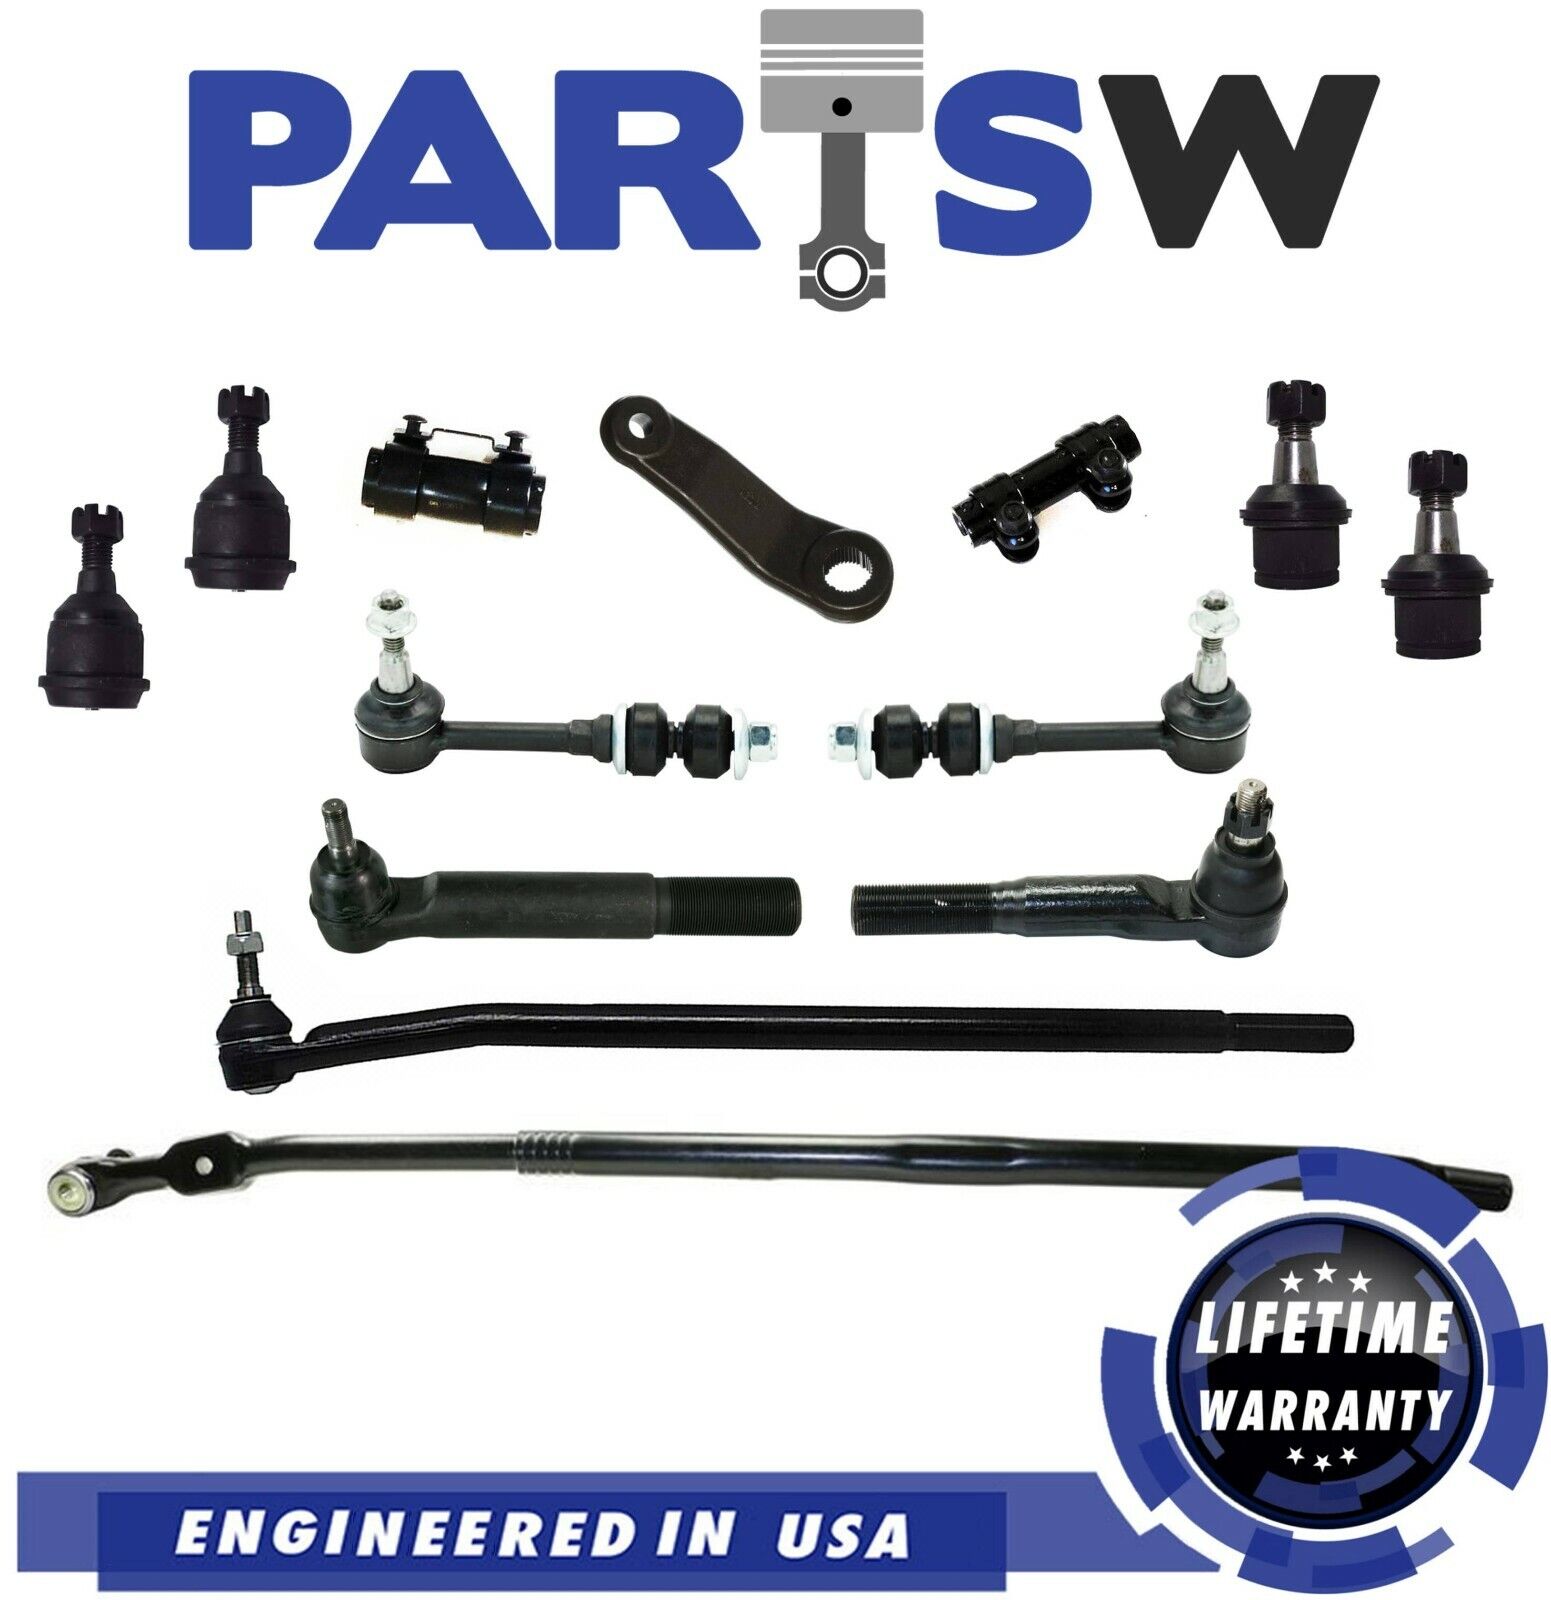 13 Pc Front Suspension Kit for Dodge Ram 2500 3500 4x4 / 4WD 2003-2005